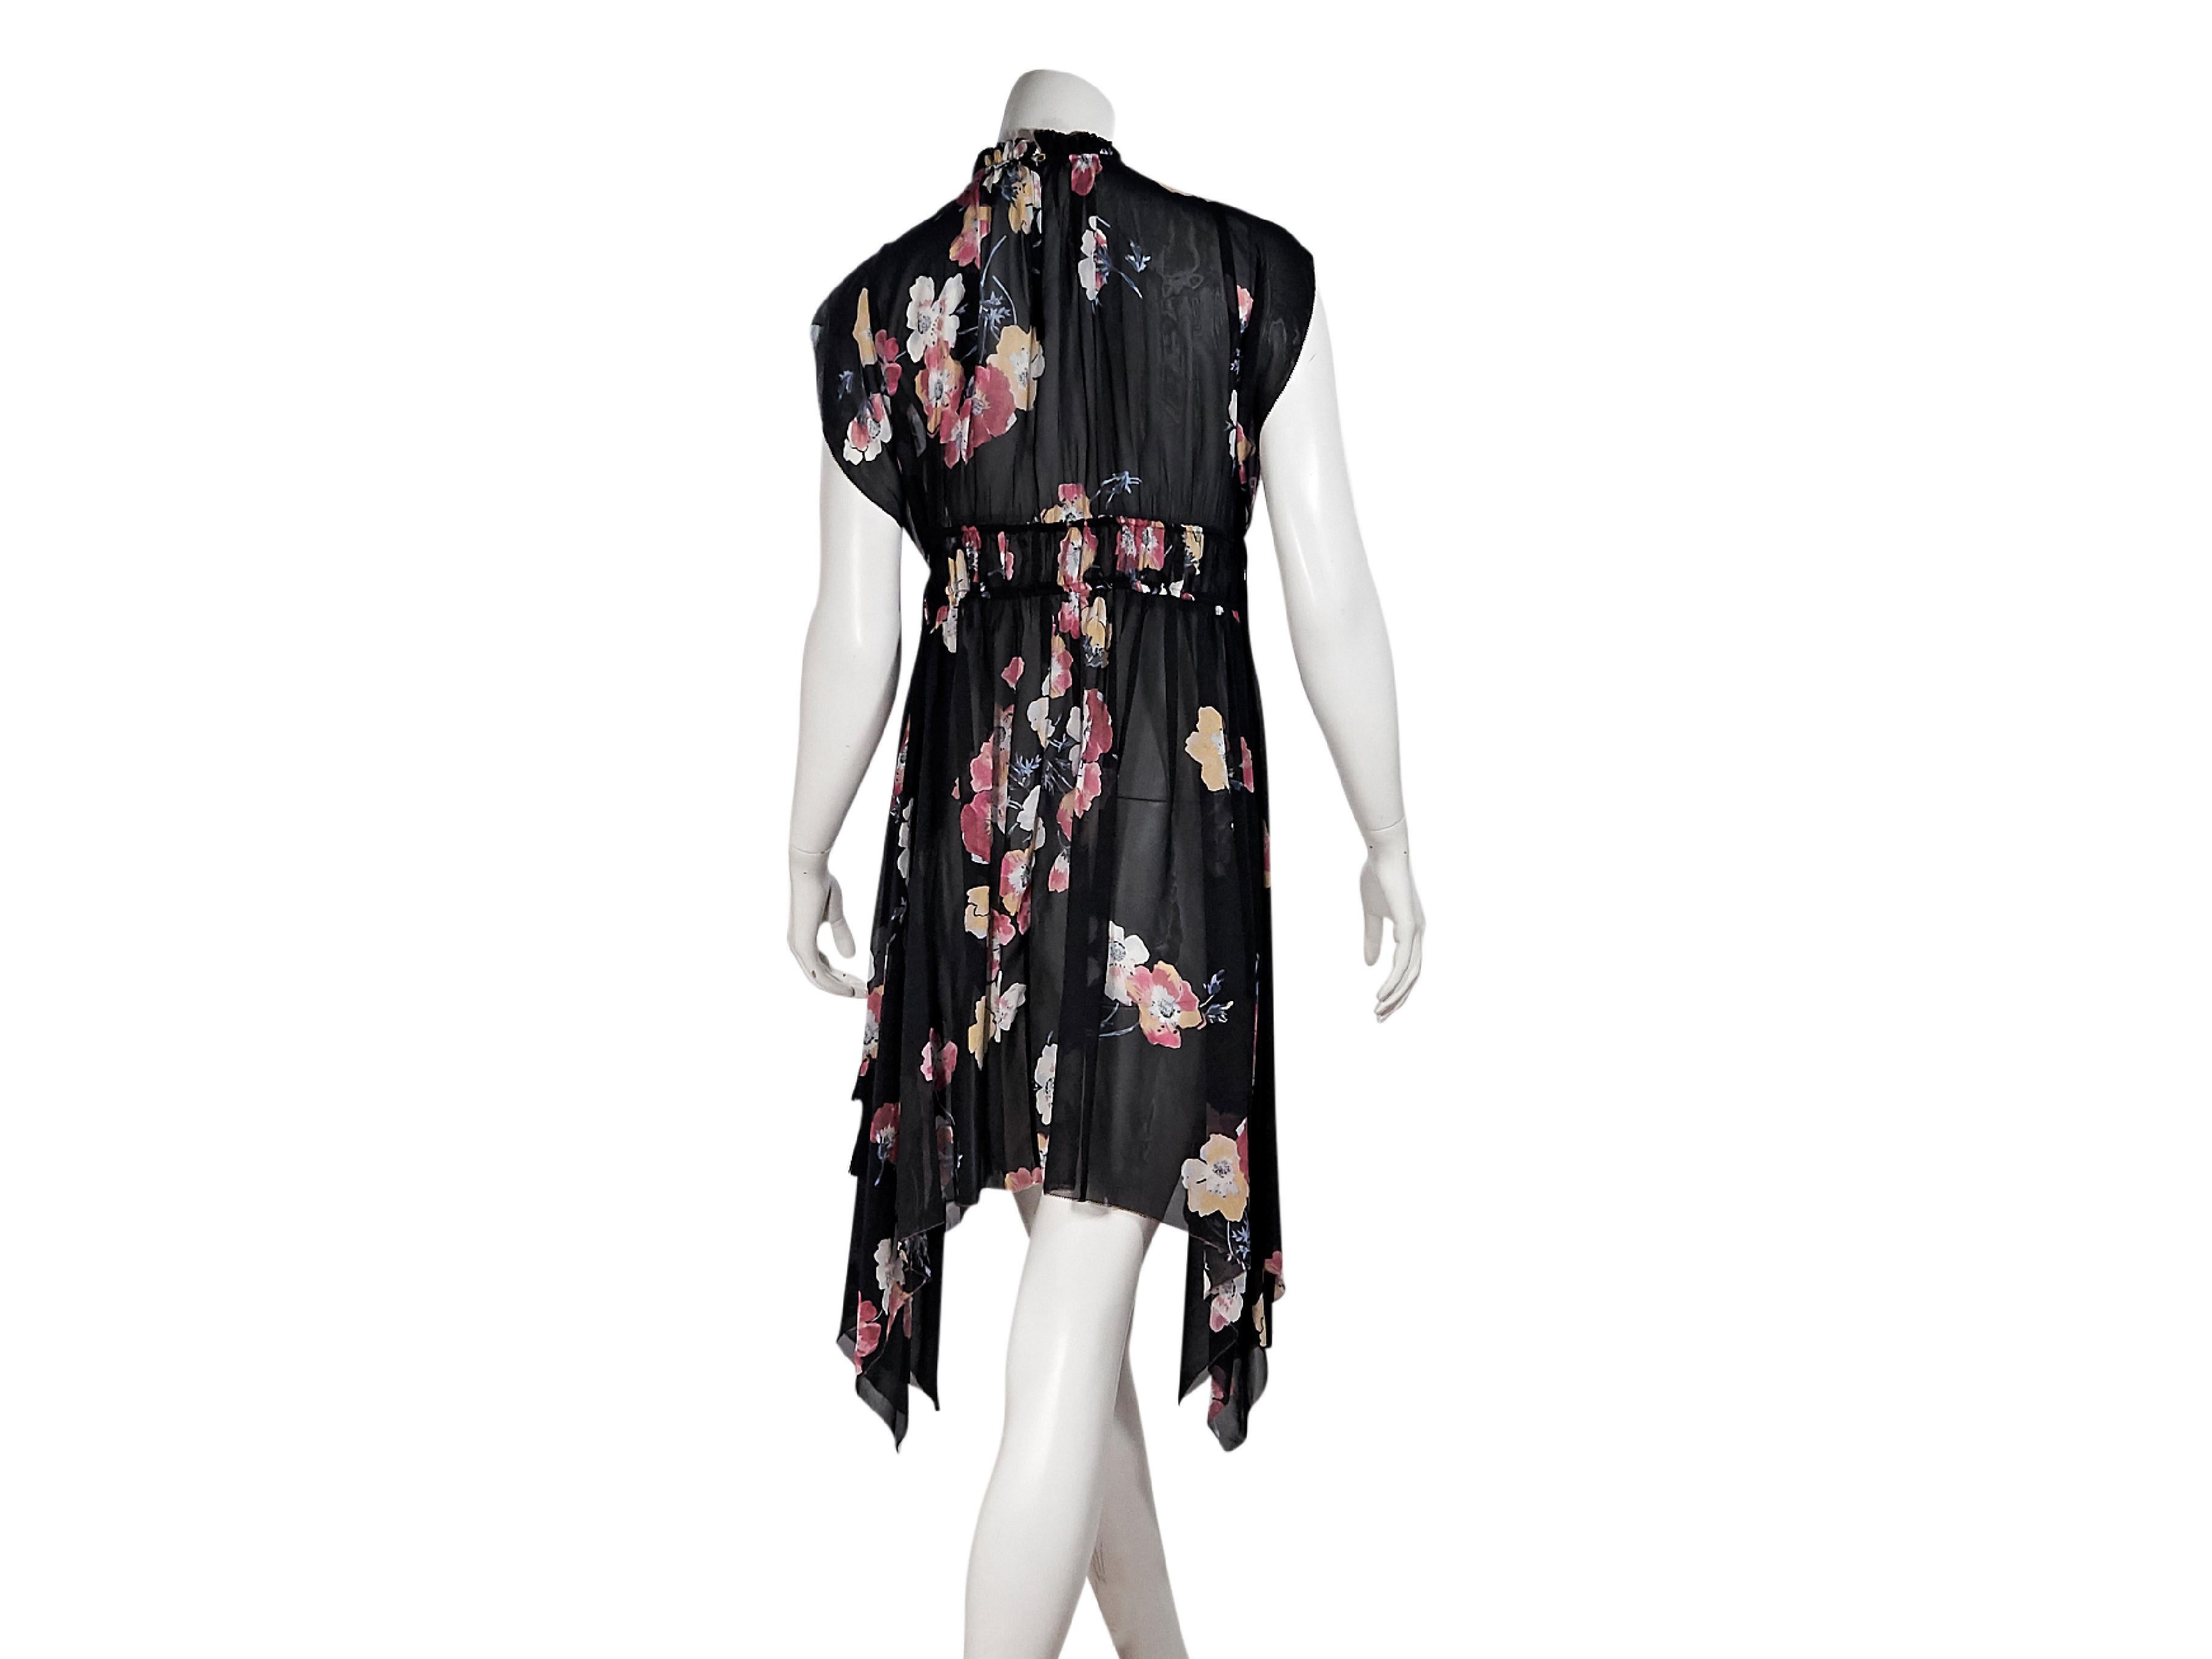 Product details:  Multicolor floral-printed dress by Ulla Johnson.  Stand collar.  Cap sleeves.  Banded waist.  Button back closure.  Sharkbite hem.  33